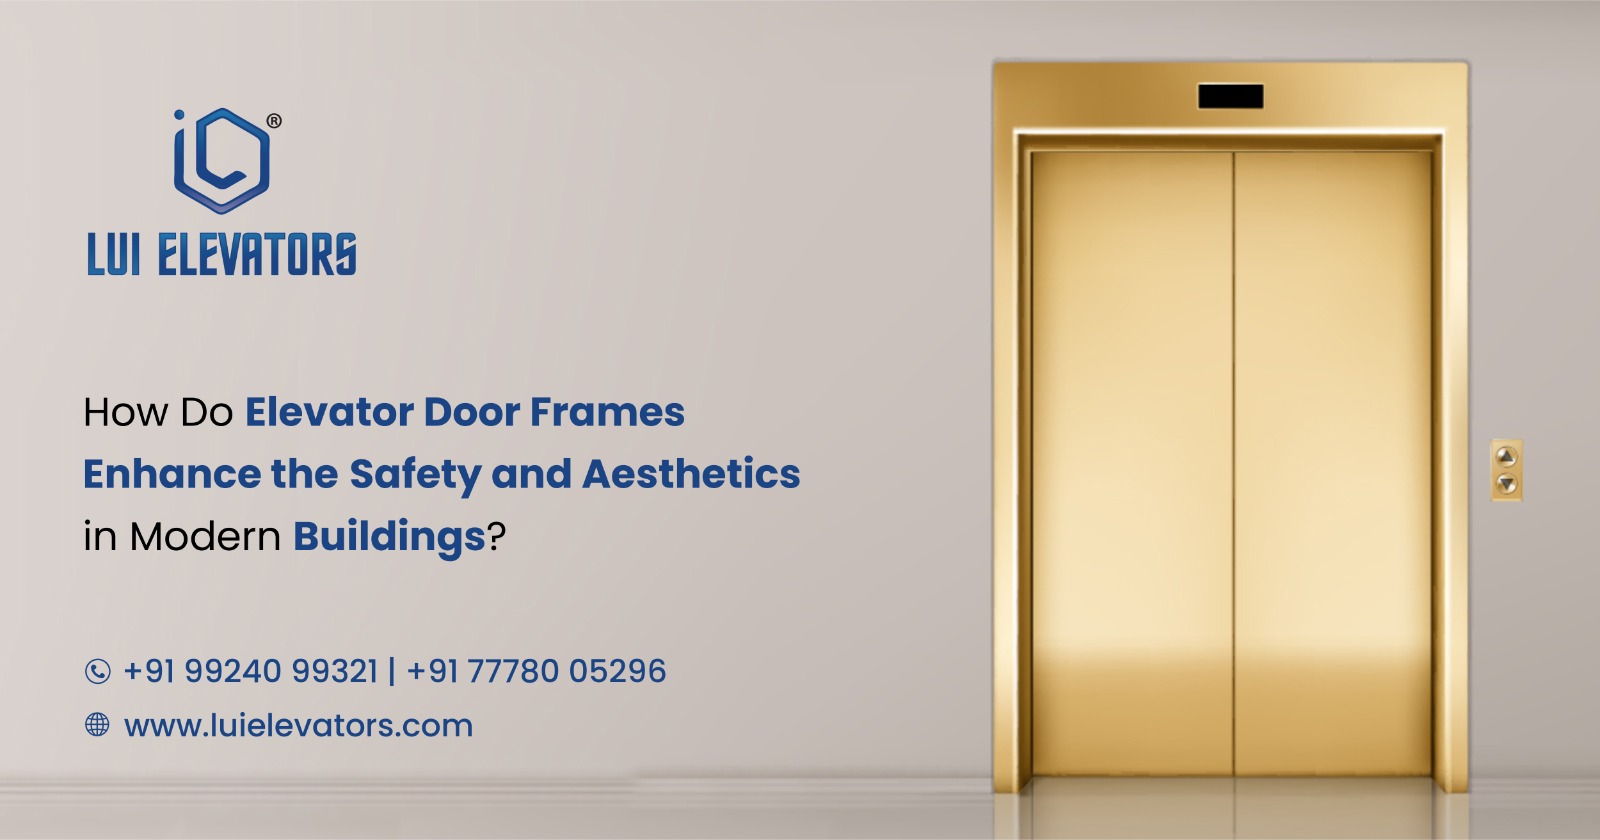 How Do Elevator Door Frames Enhance the Safety and Aesthetics in Modern Buildings?